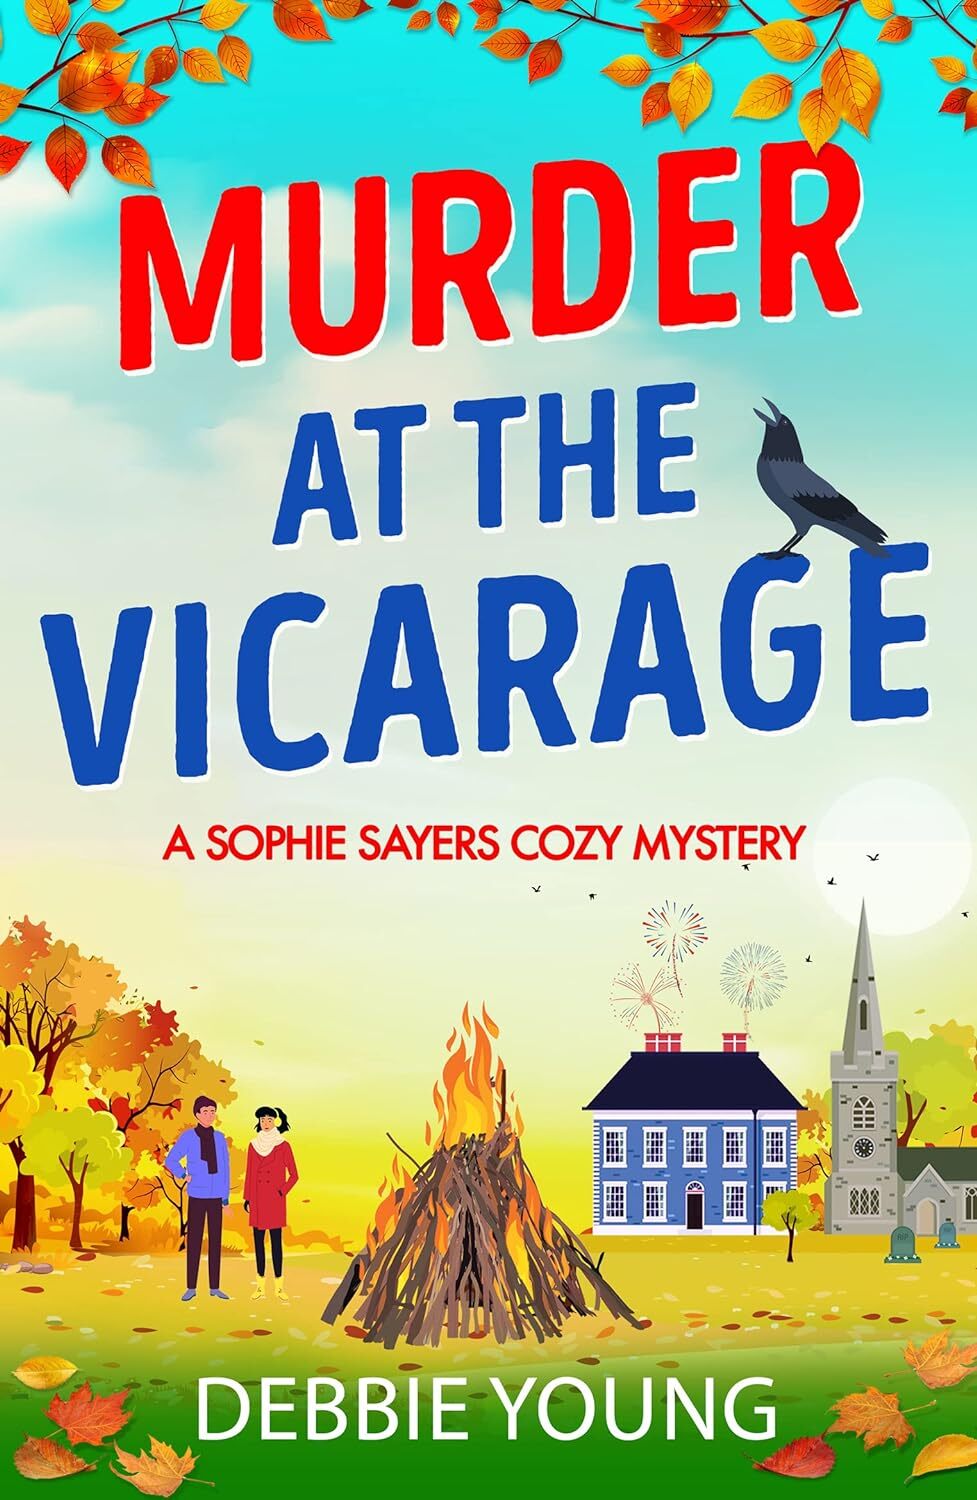 sophie-sayers-tome-2-murder-at-the-vicarage-5371787.jpg